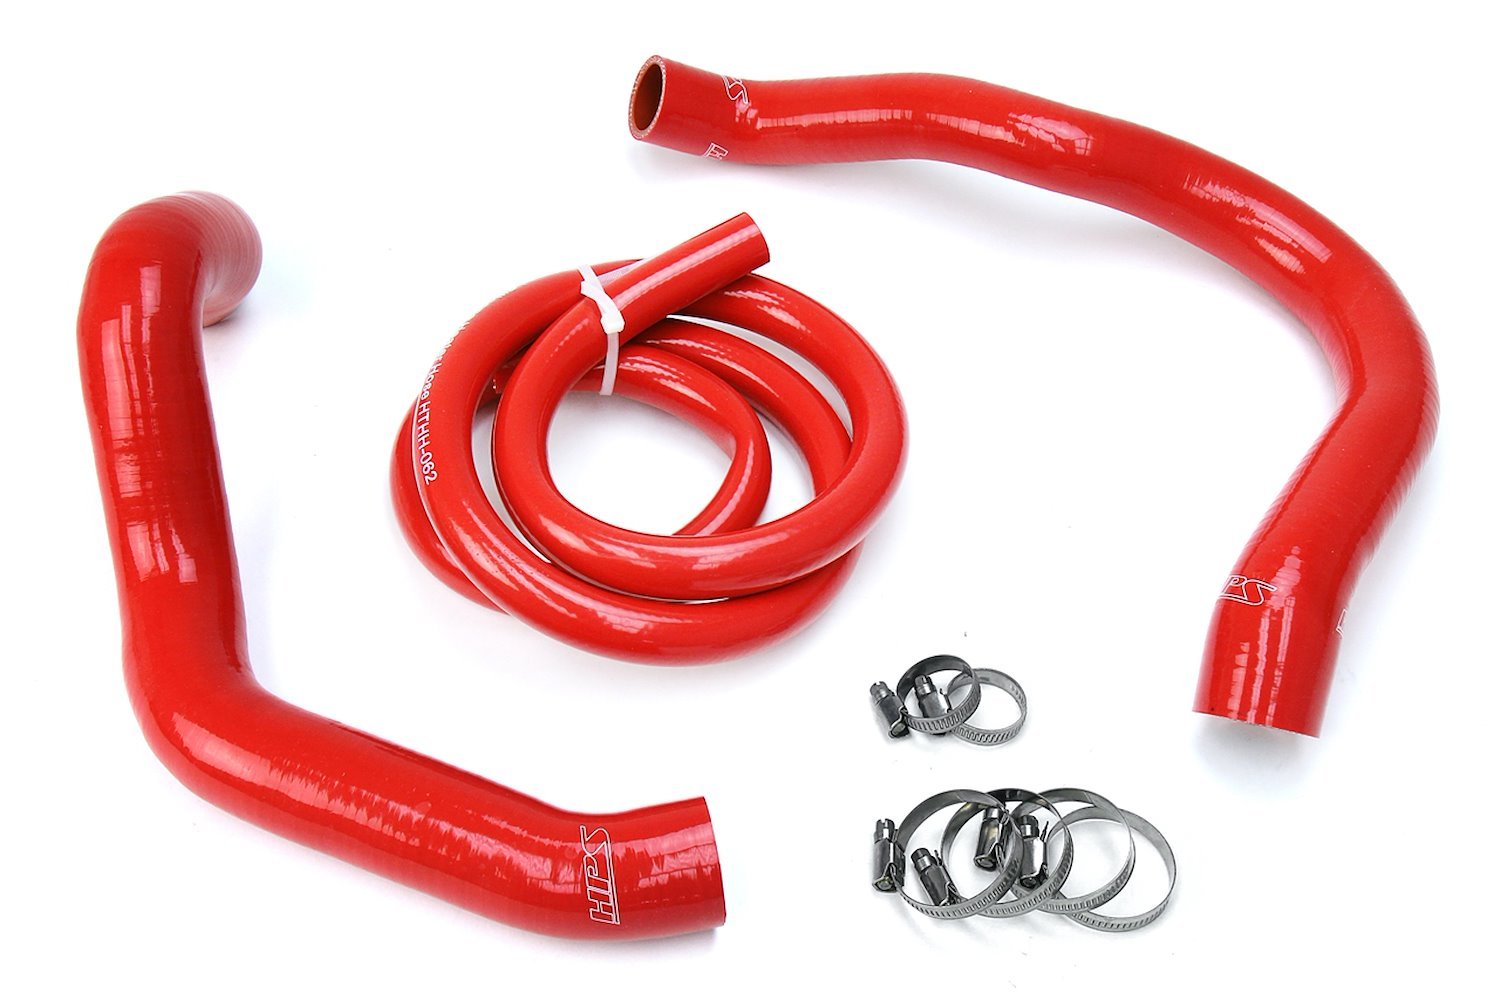 57-1338-RED Coolant Hose Kit, High-Temp 3-Ply Reinforced Silicone, Replace Rubber Radiator Heater Coolant Hoses